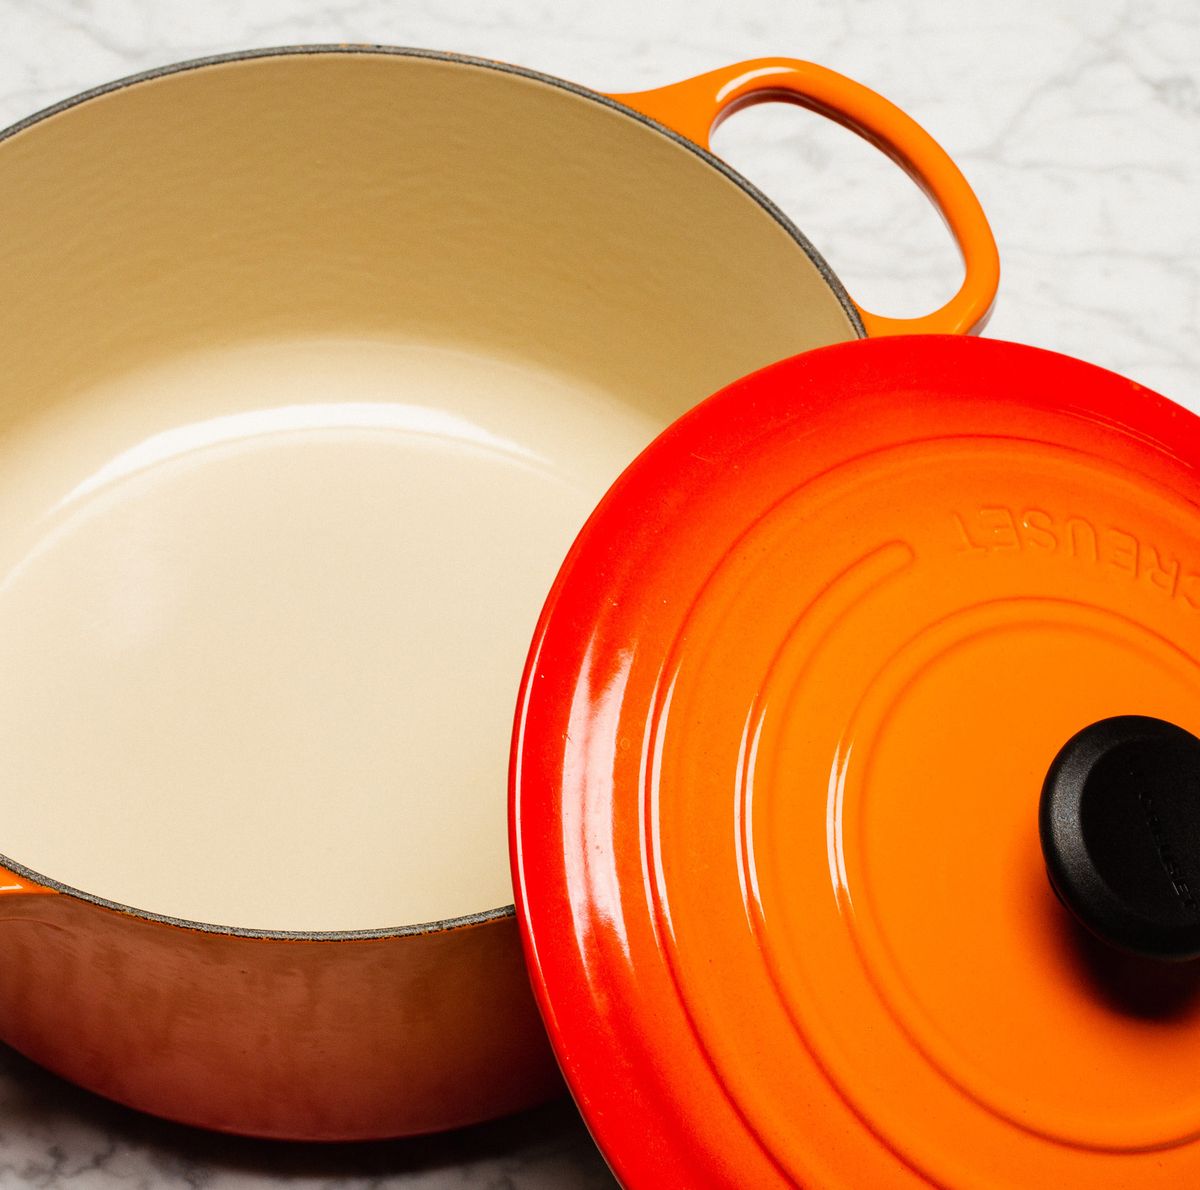 A Tale of Two Dutch Ovens